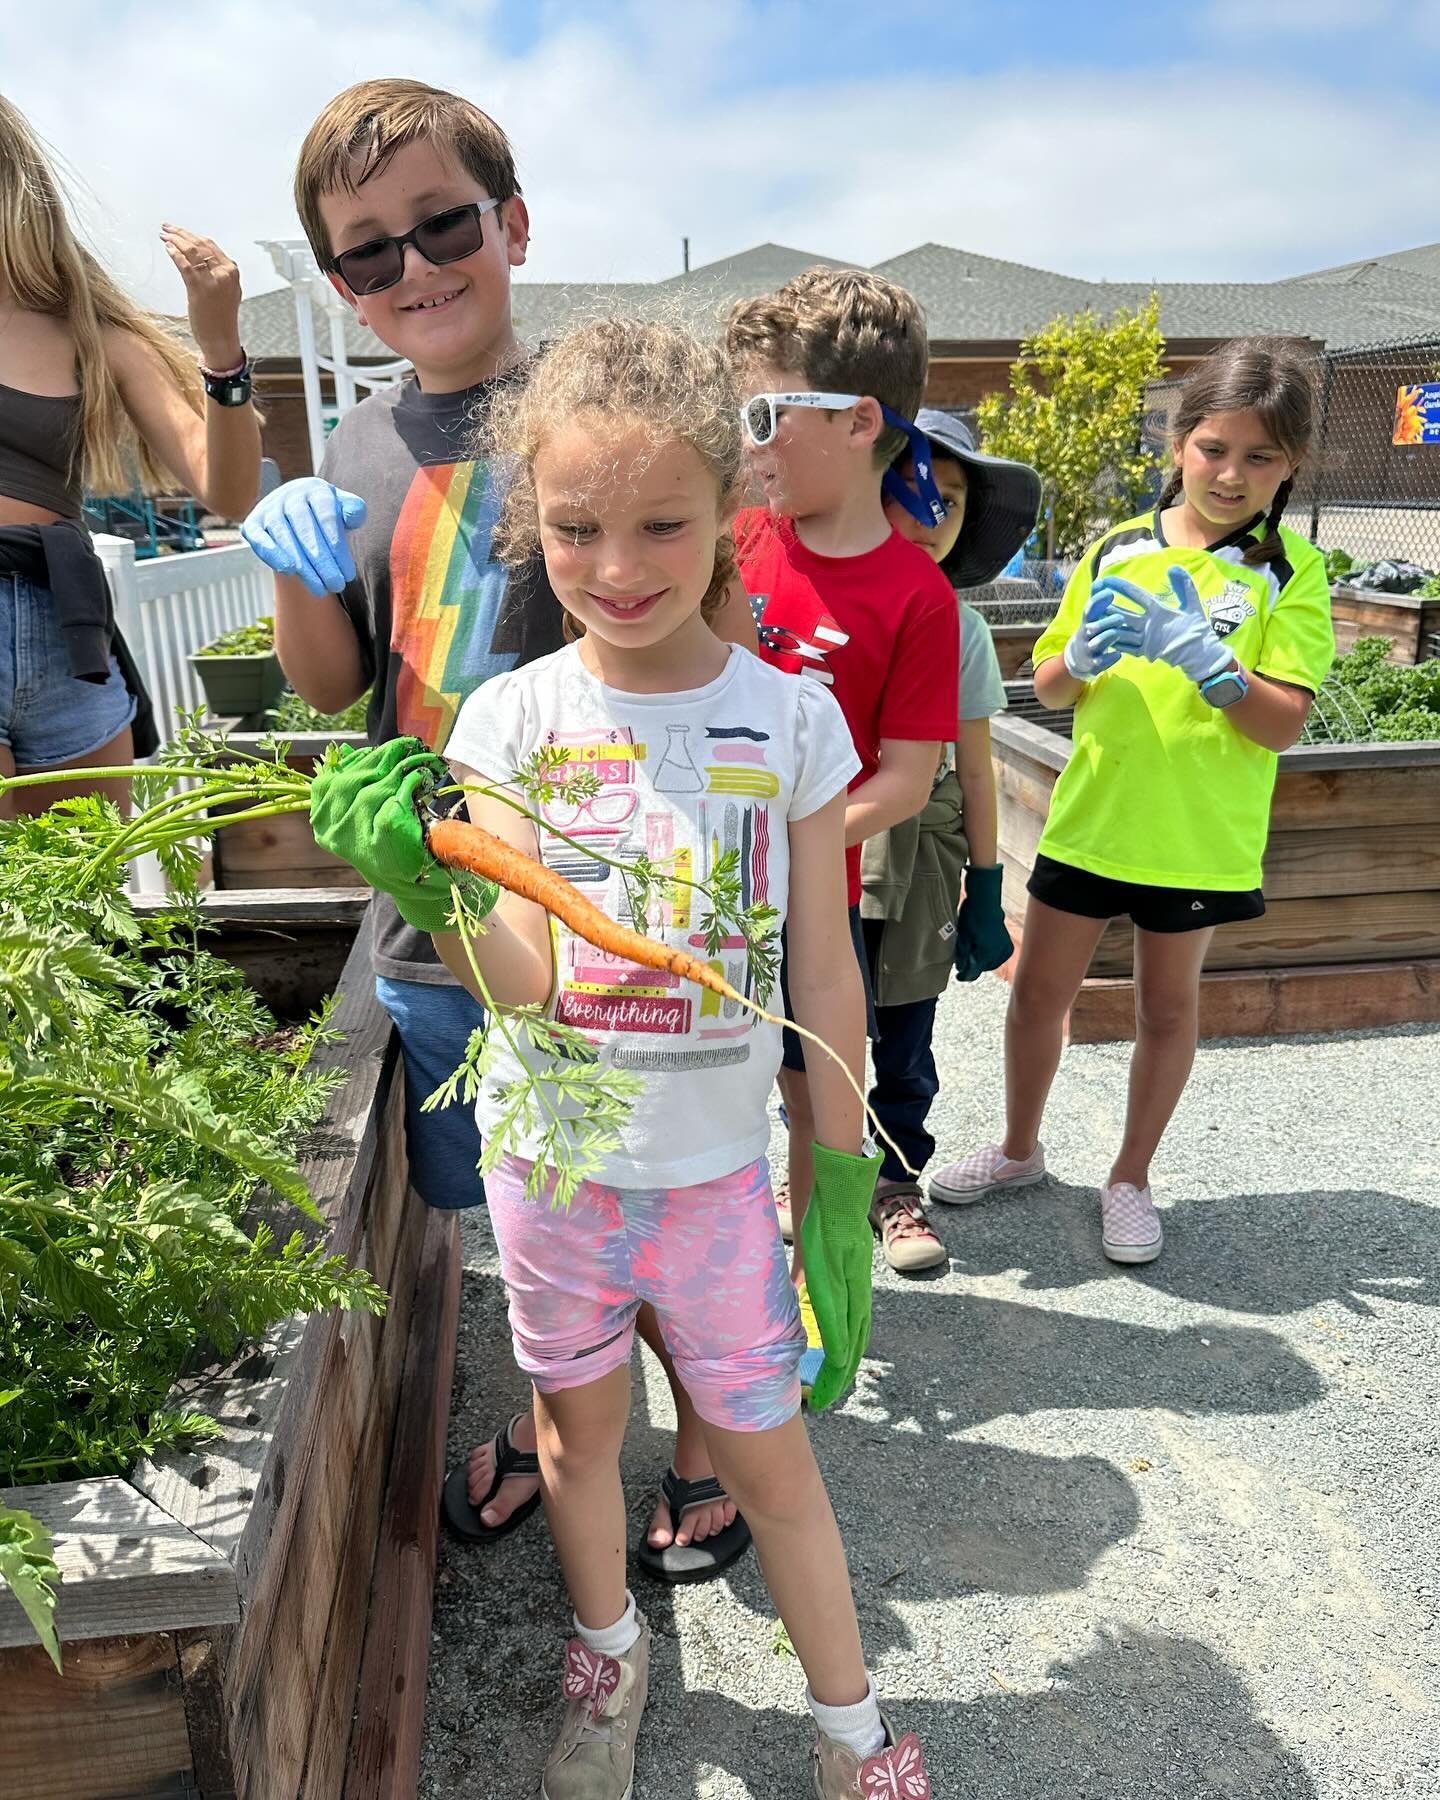 $25 Emerald Keepers Day Camp! 🌈🌱🌻

Sat, April 27th:
1st-3rd grade camp, 9-11 am
4th-5th grade camp, 1-3 pm

Every year, our amazing high school interns host a day camp to introduce kids to gardening, composting, and fundamental environmental conce